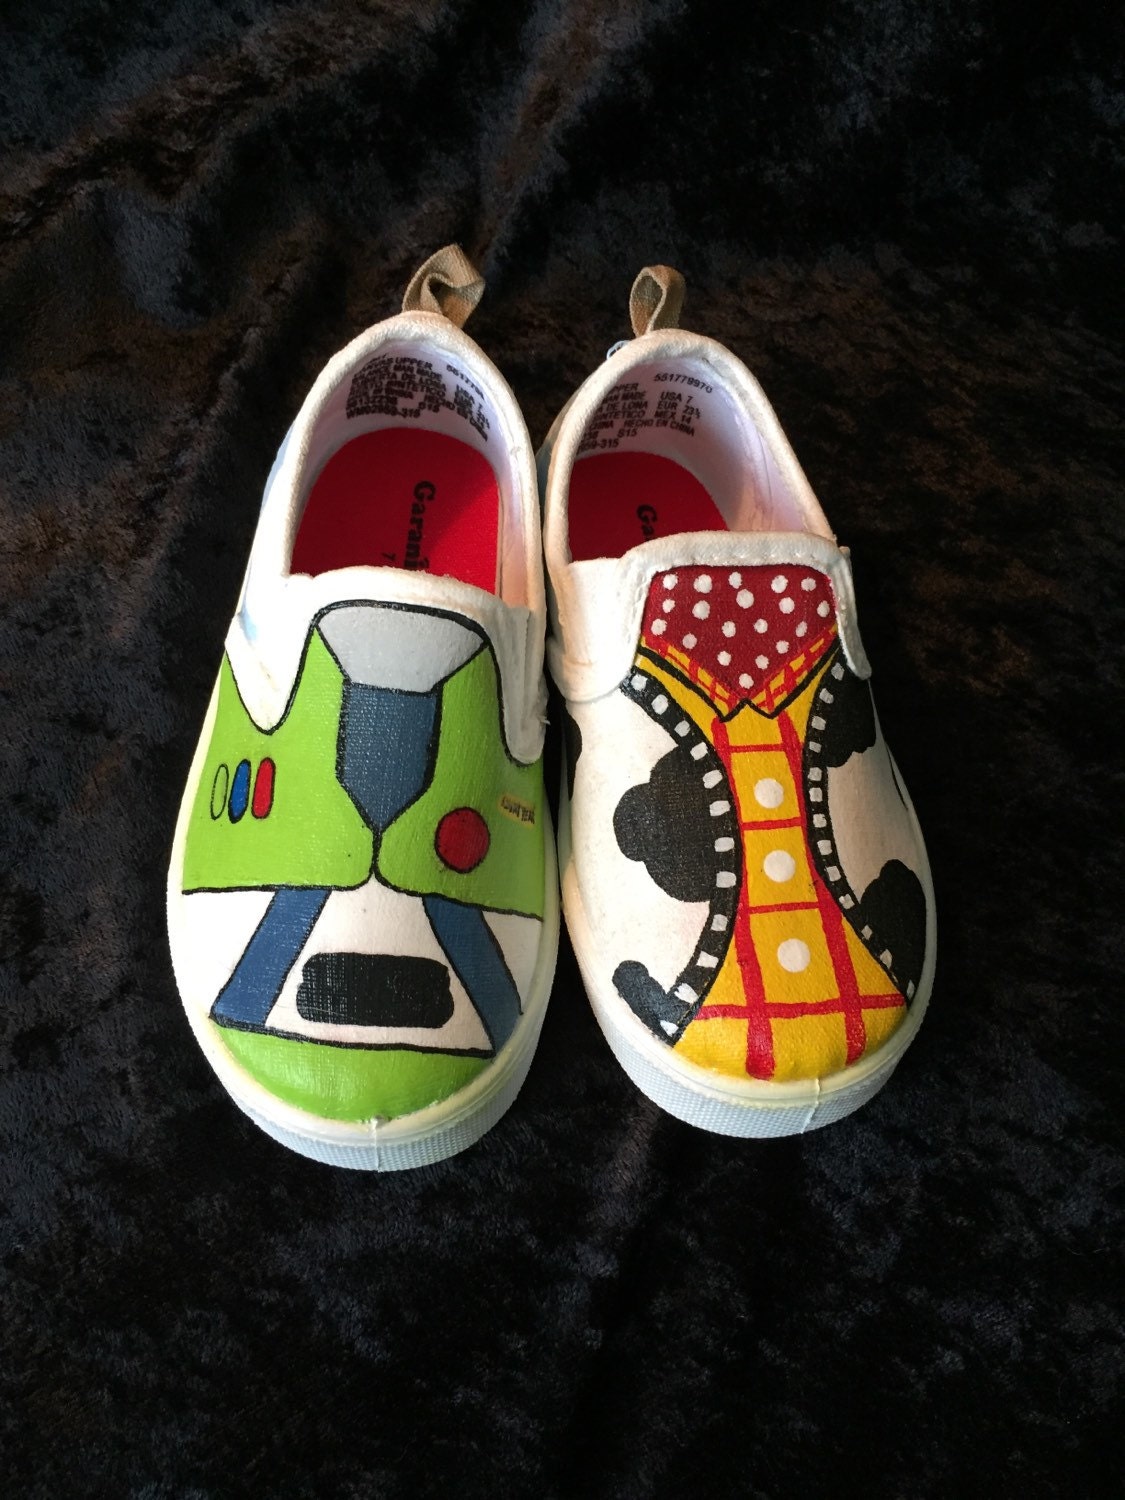 Toy story shoes by CanvasCreations89 on Etsy